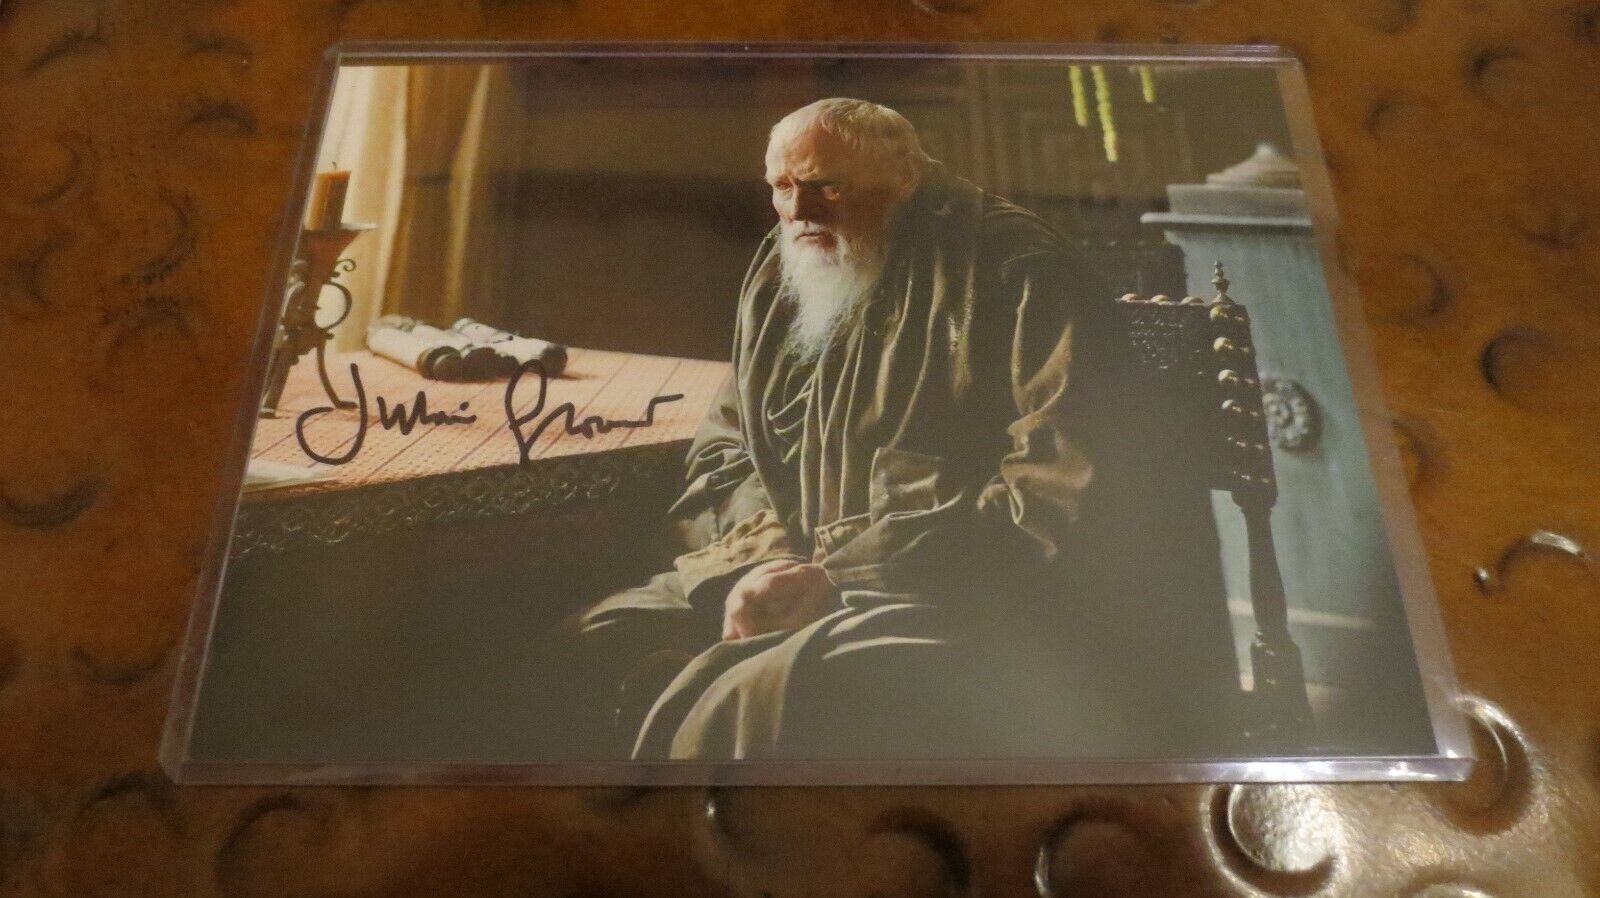 Julian Glover as Grand Maester Pycelle Game of Thrones signed autographed photo